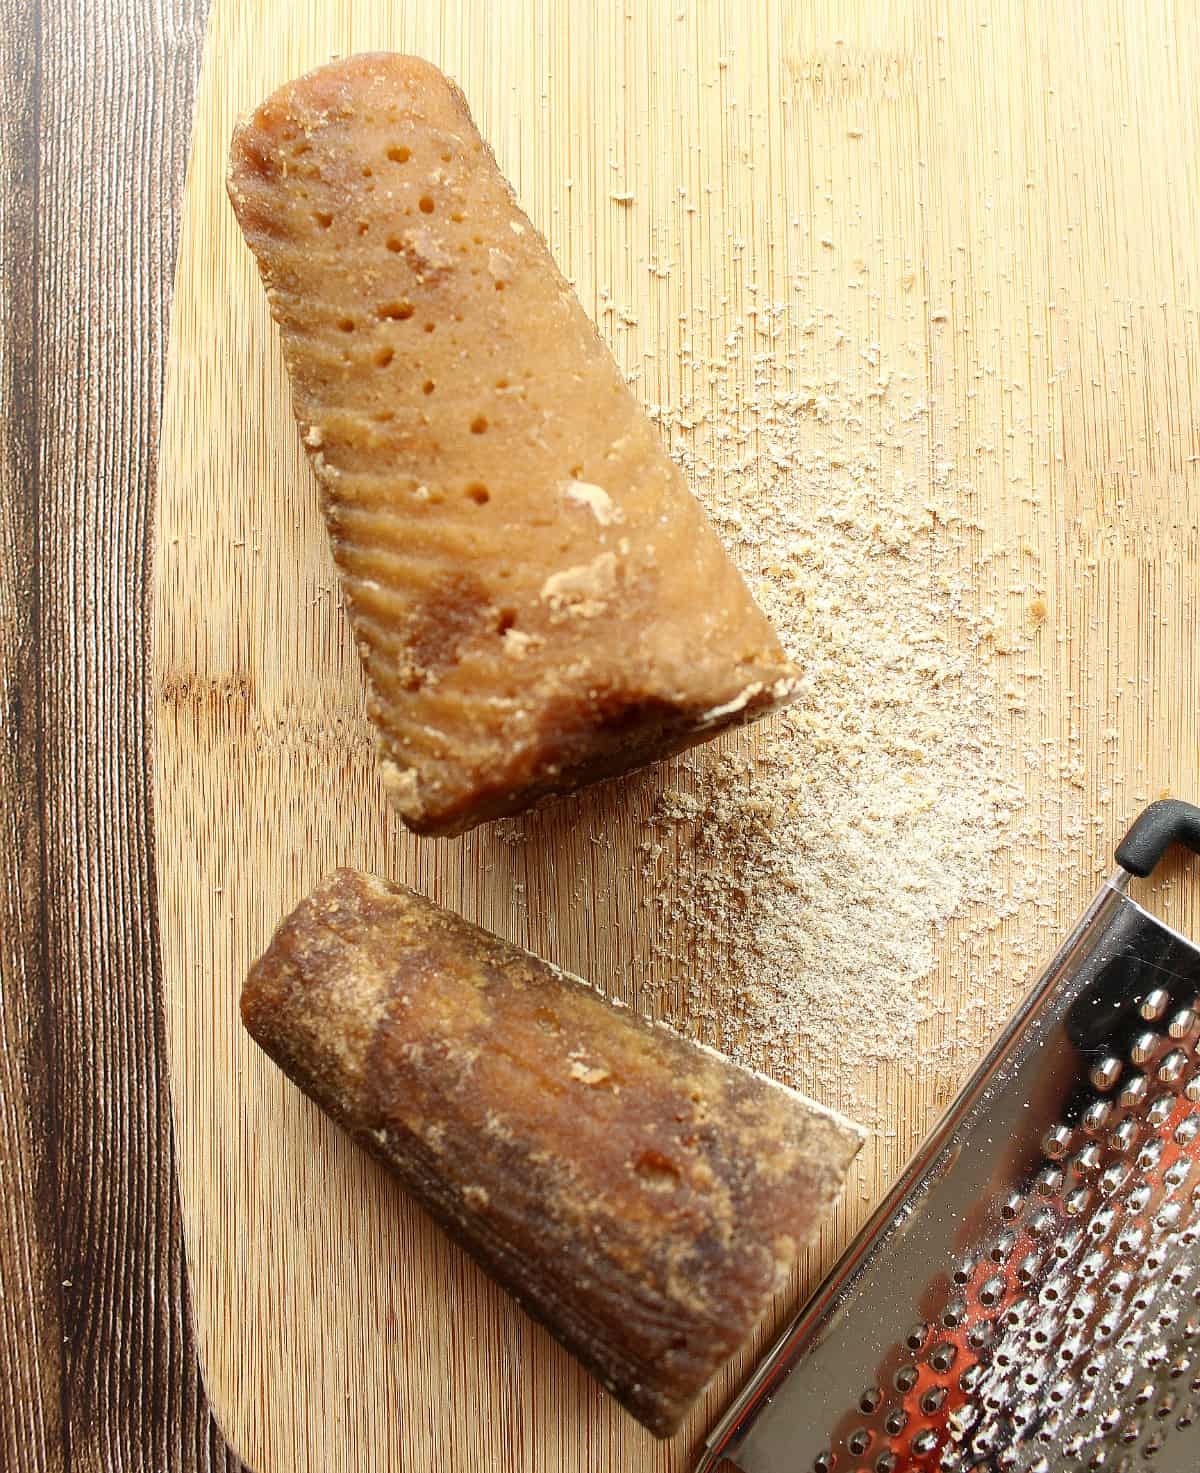 Two piloncillo cones next to grated sugar and a metal grater.